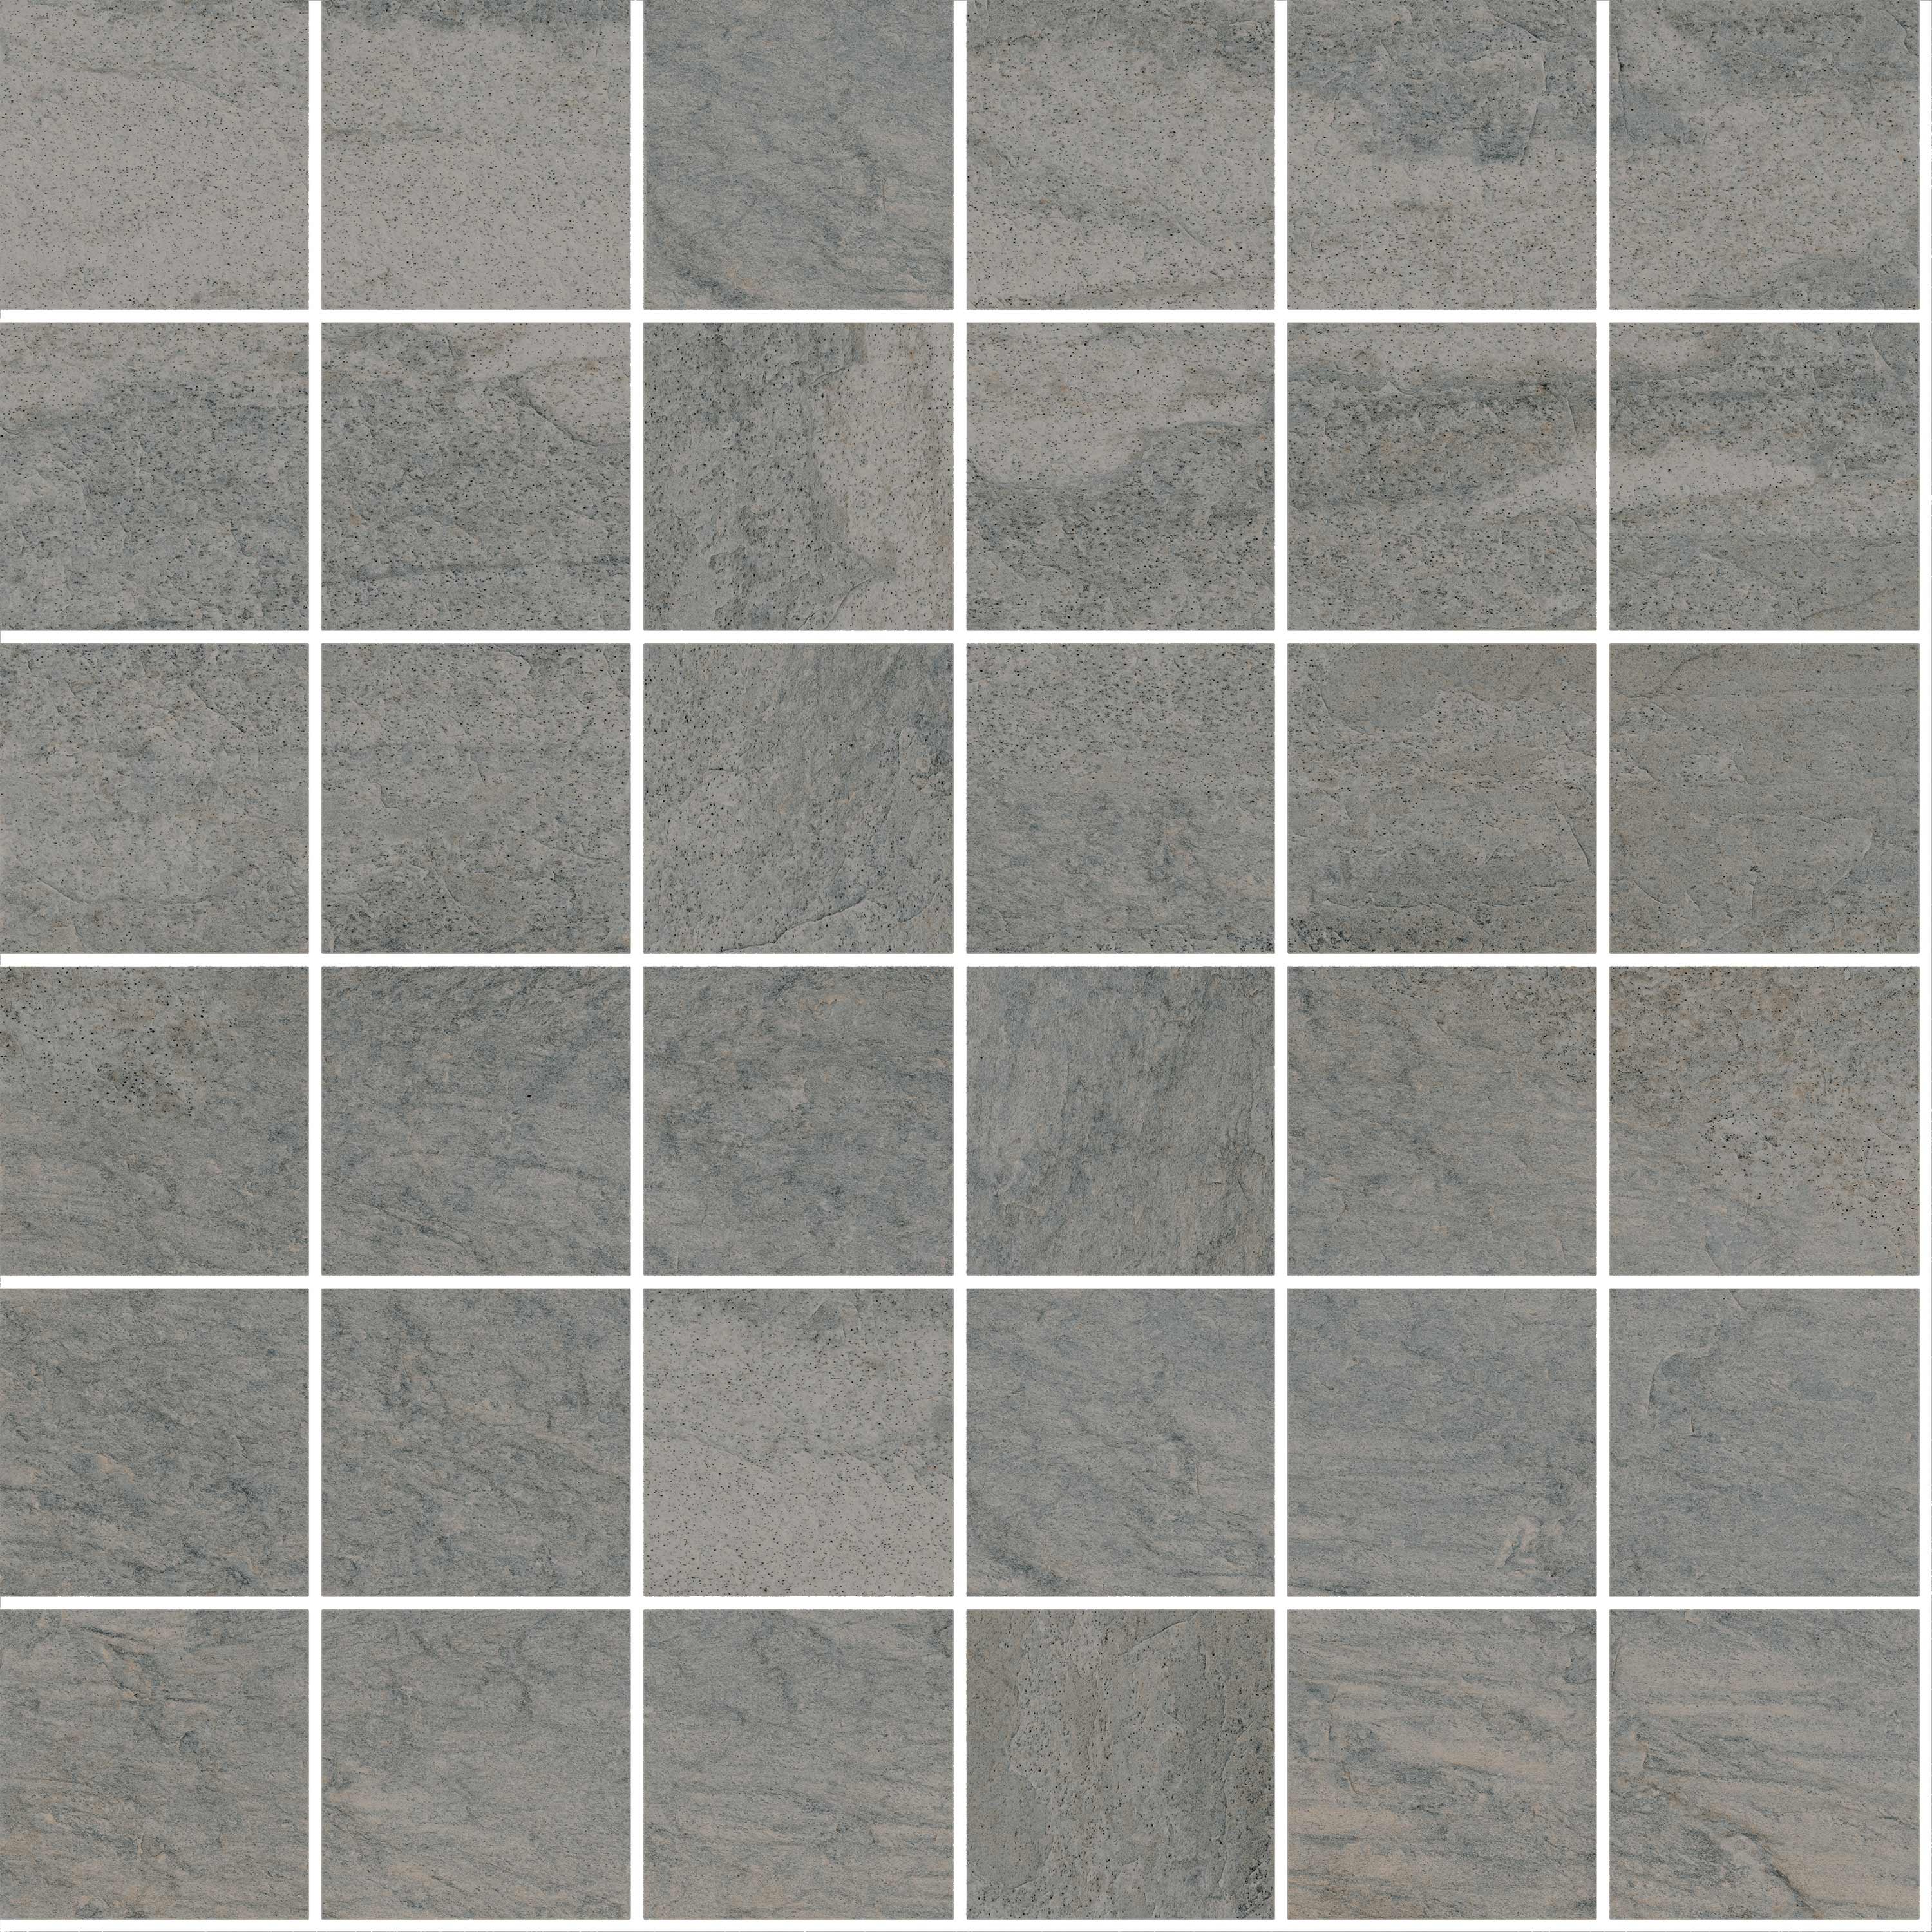 landmark 9mm globe silver quartz straight stack 2x2 mosaic 12x12x9mm matte rectified porcelain tile distributed by surface group international